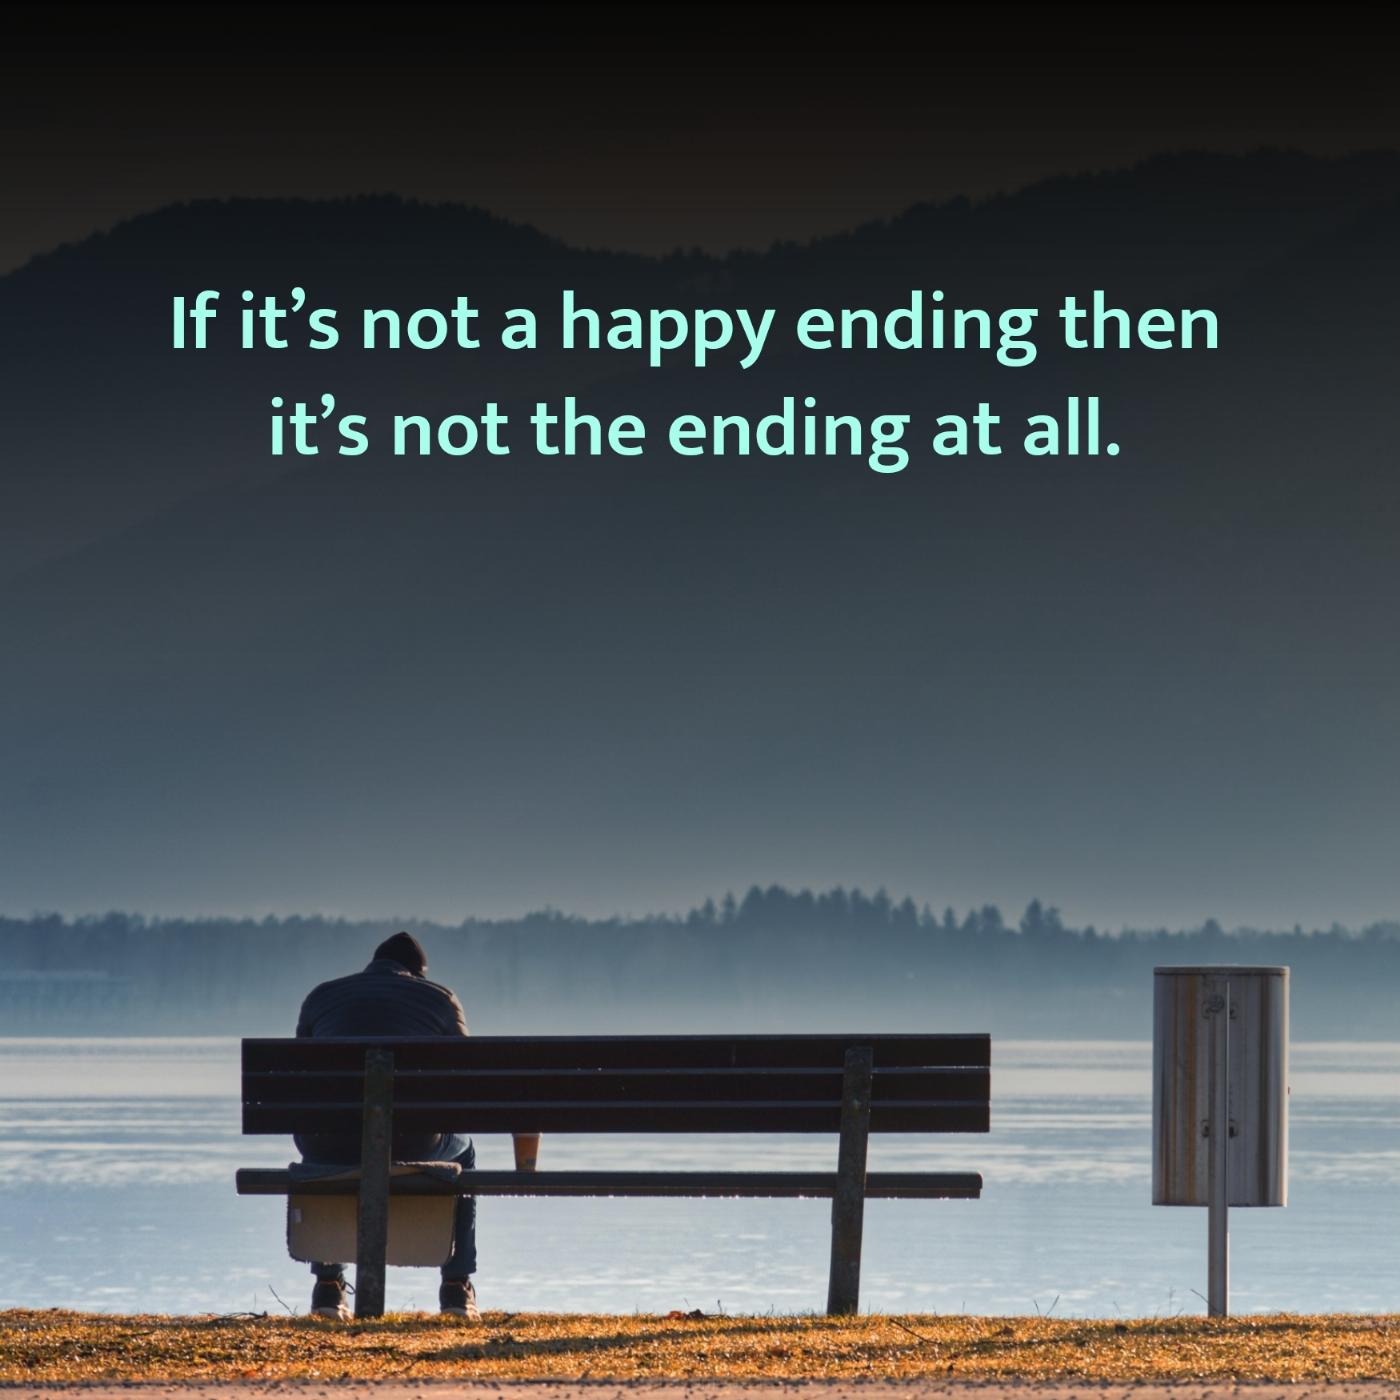 If its not a happy ending then its not the ending at all